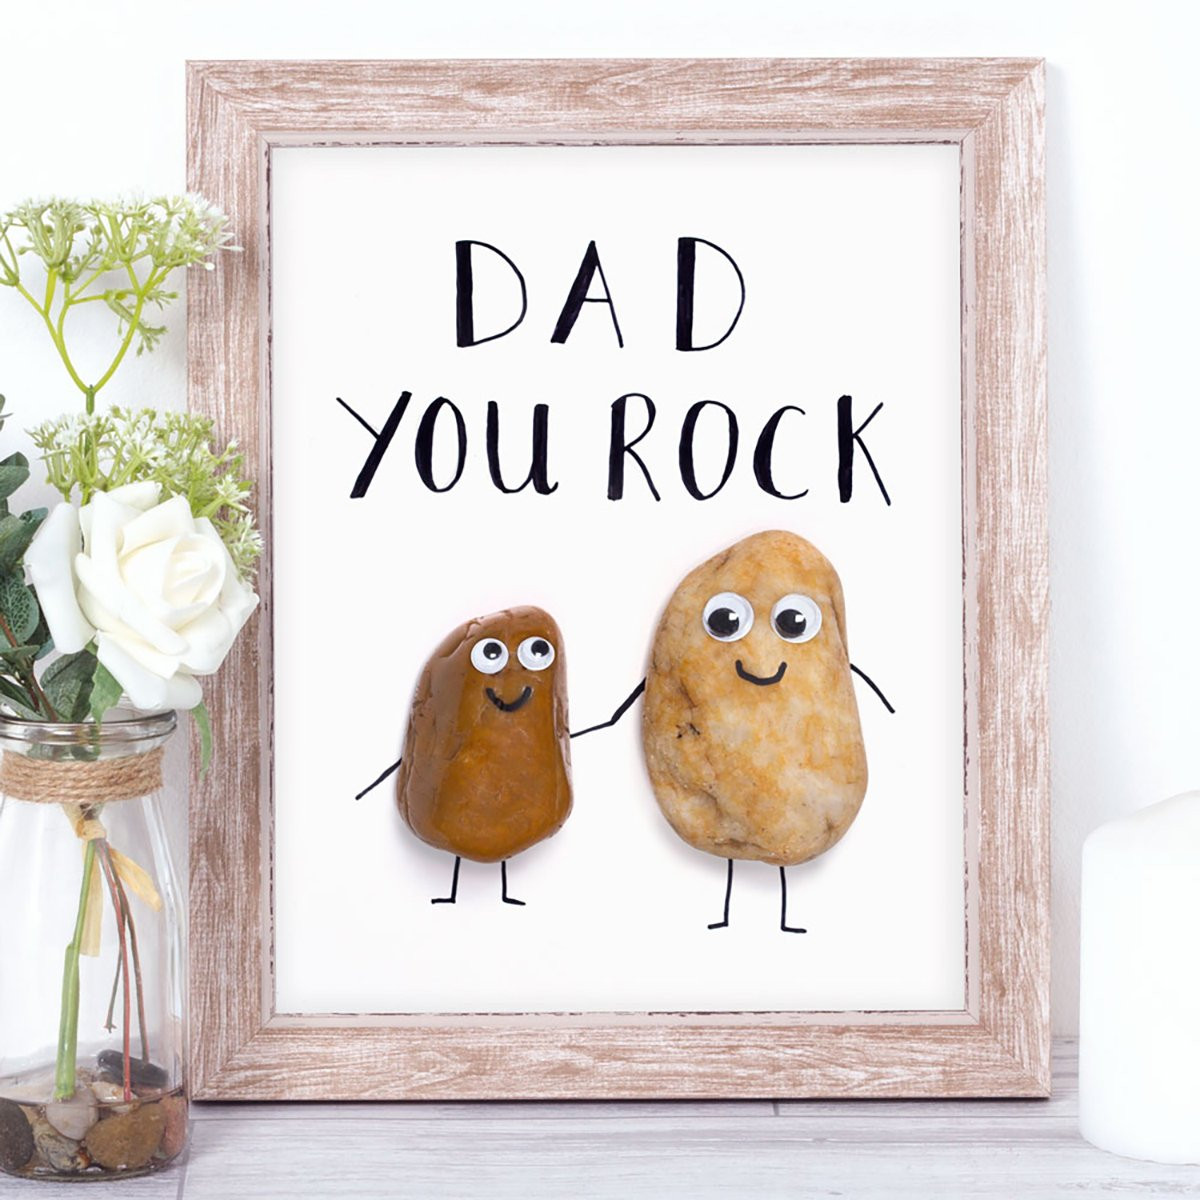 Father'S Day Craft Ideas For Toddlers
 8 Father’s Day Crafts Kids Can Help Make